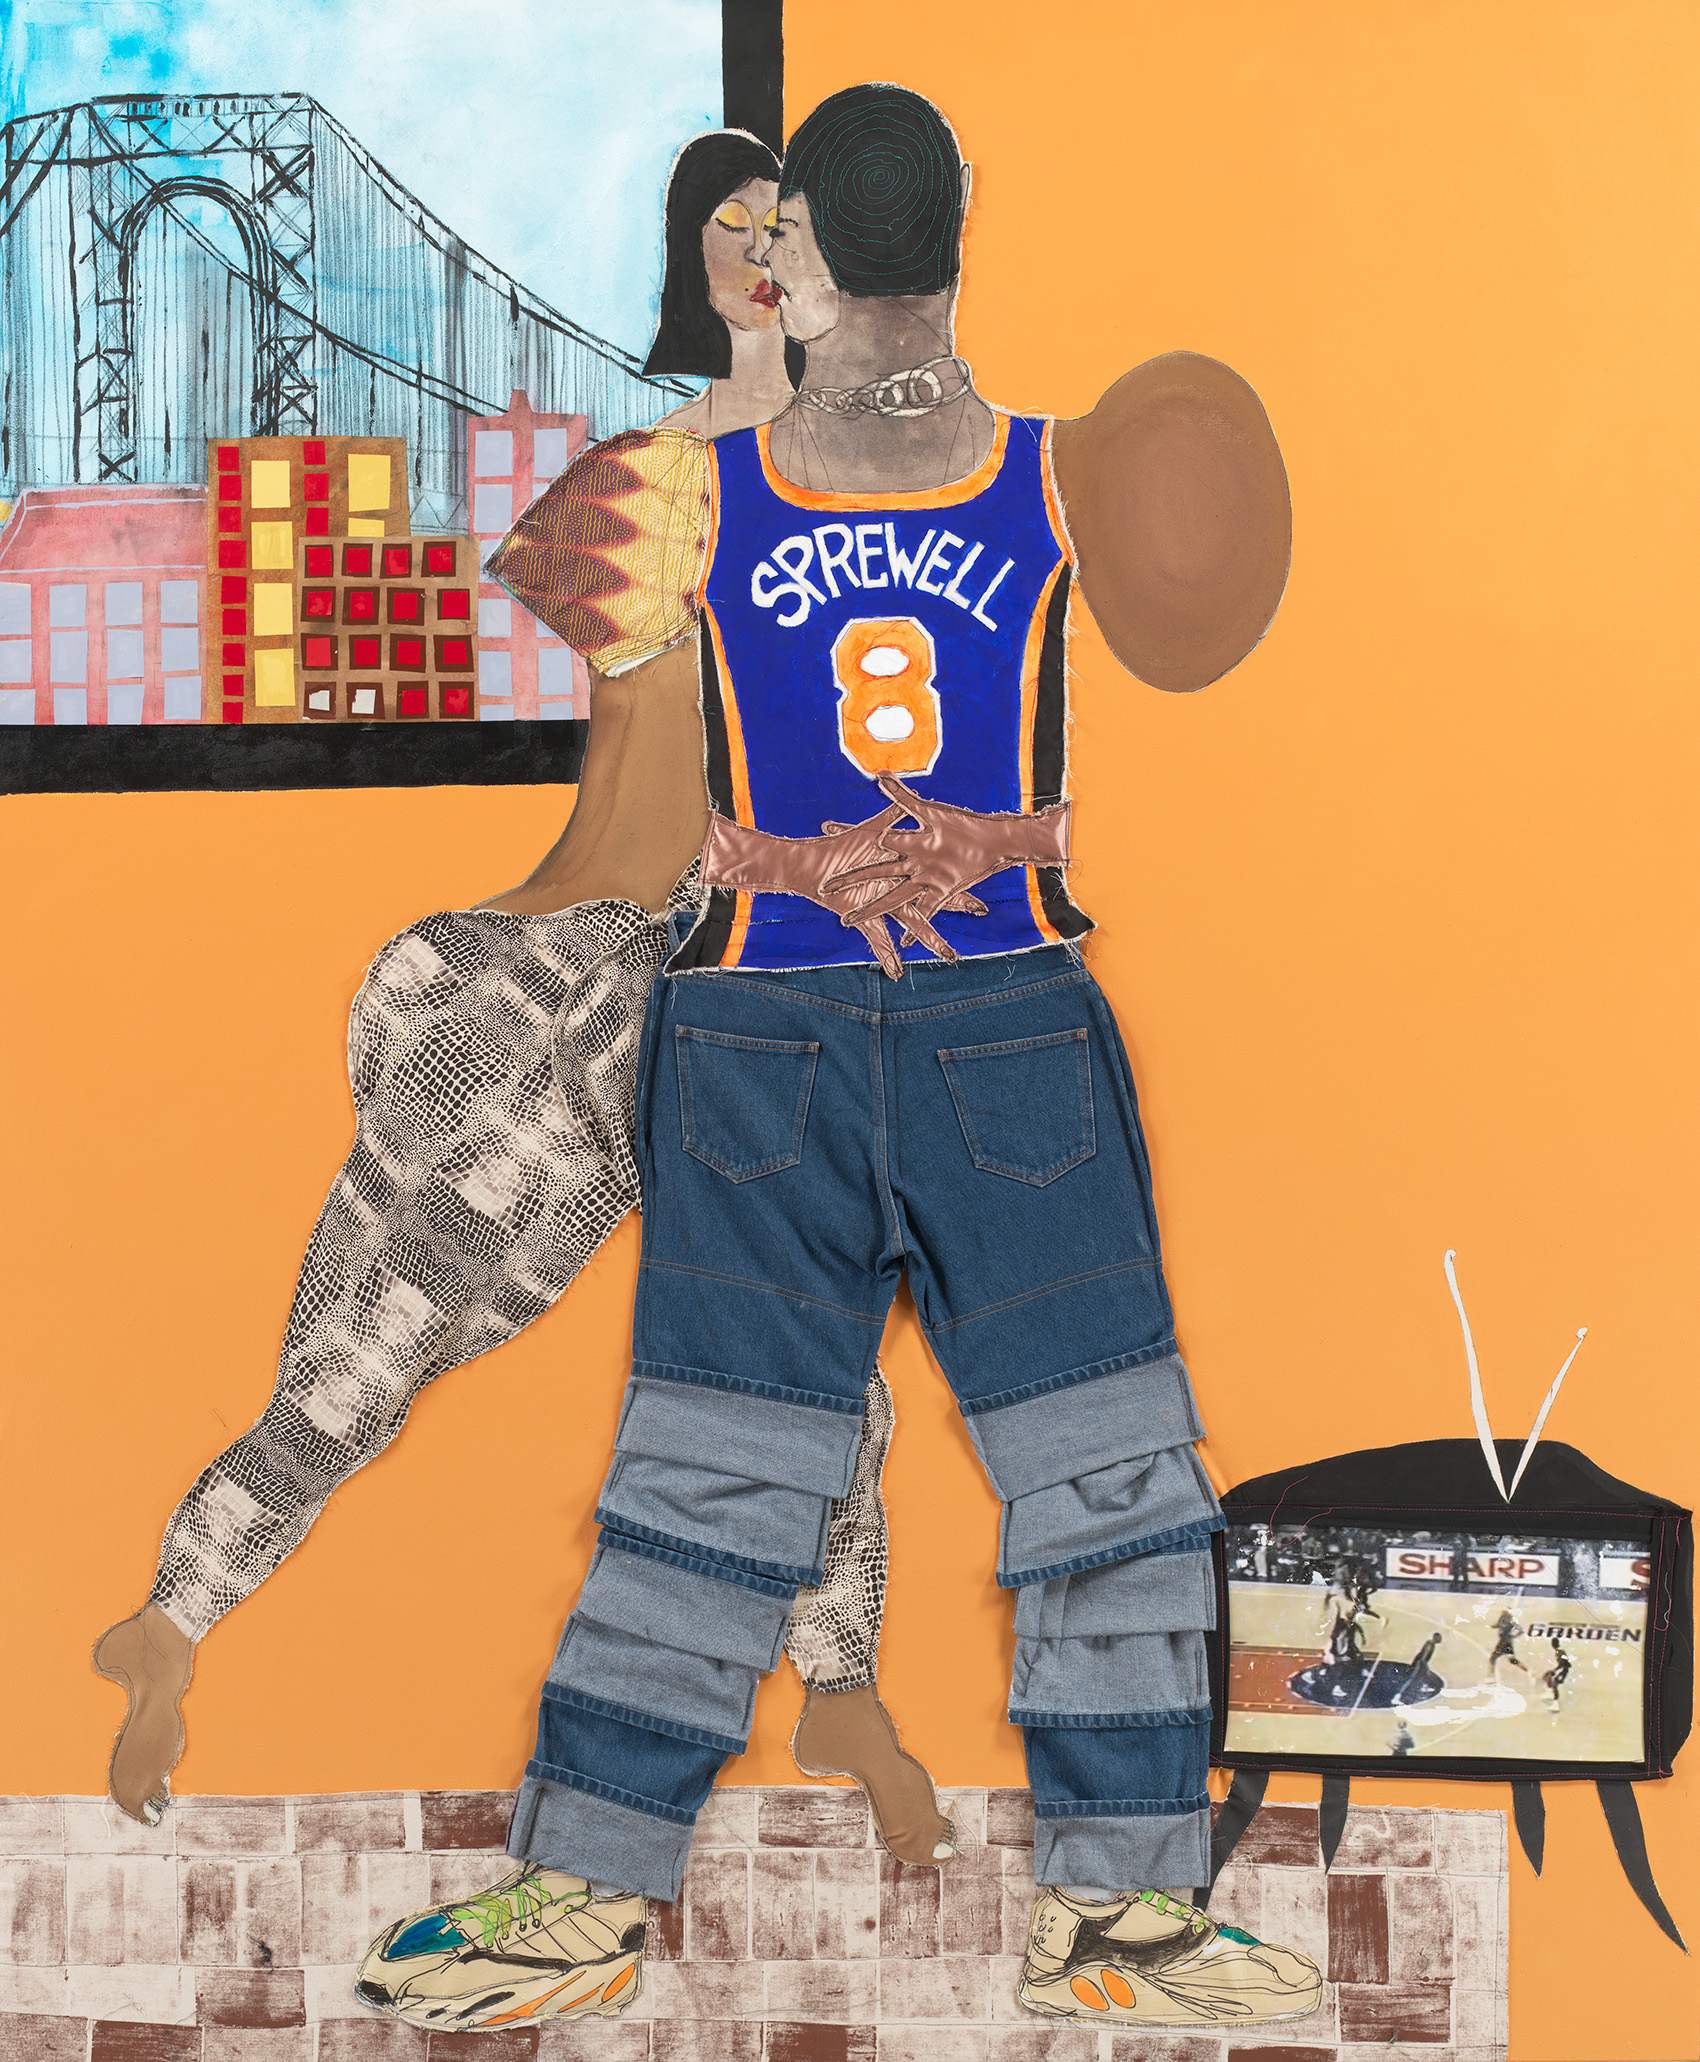 Collage piece showing a woman embracing a man with a basketball jersey with Sprewell on the back.